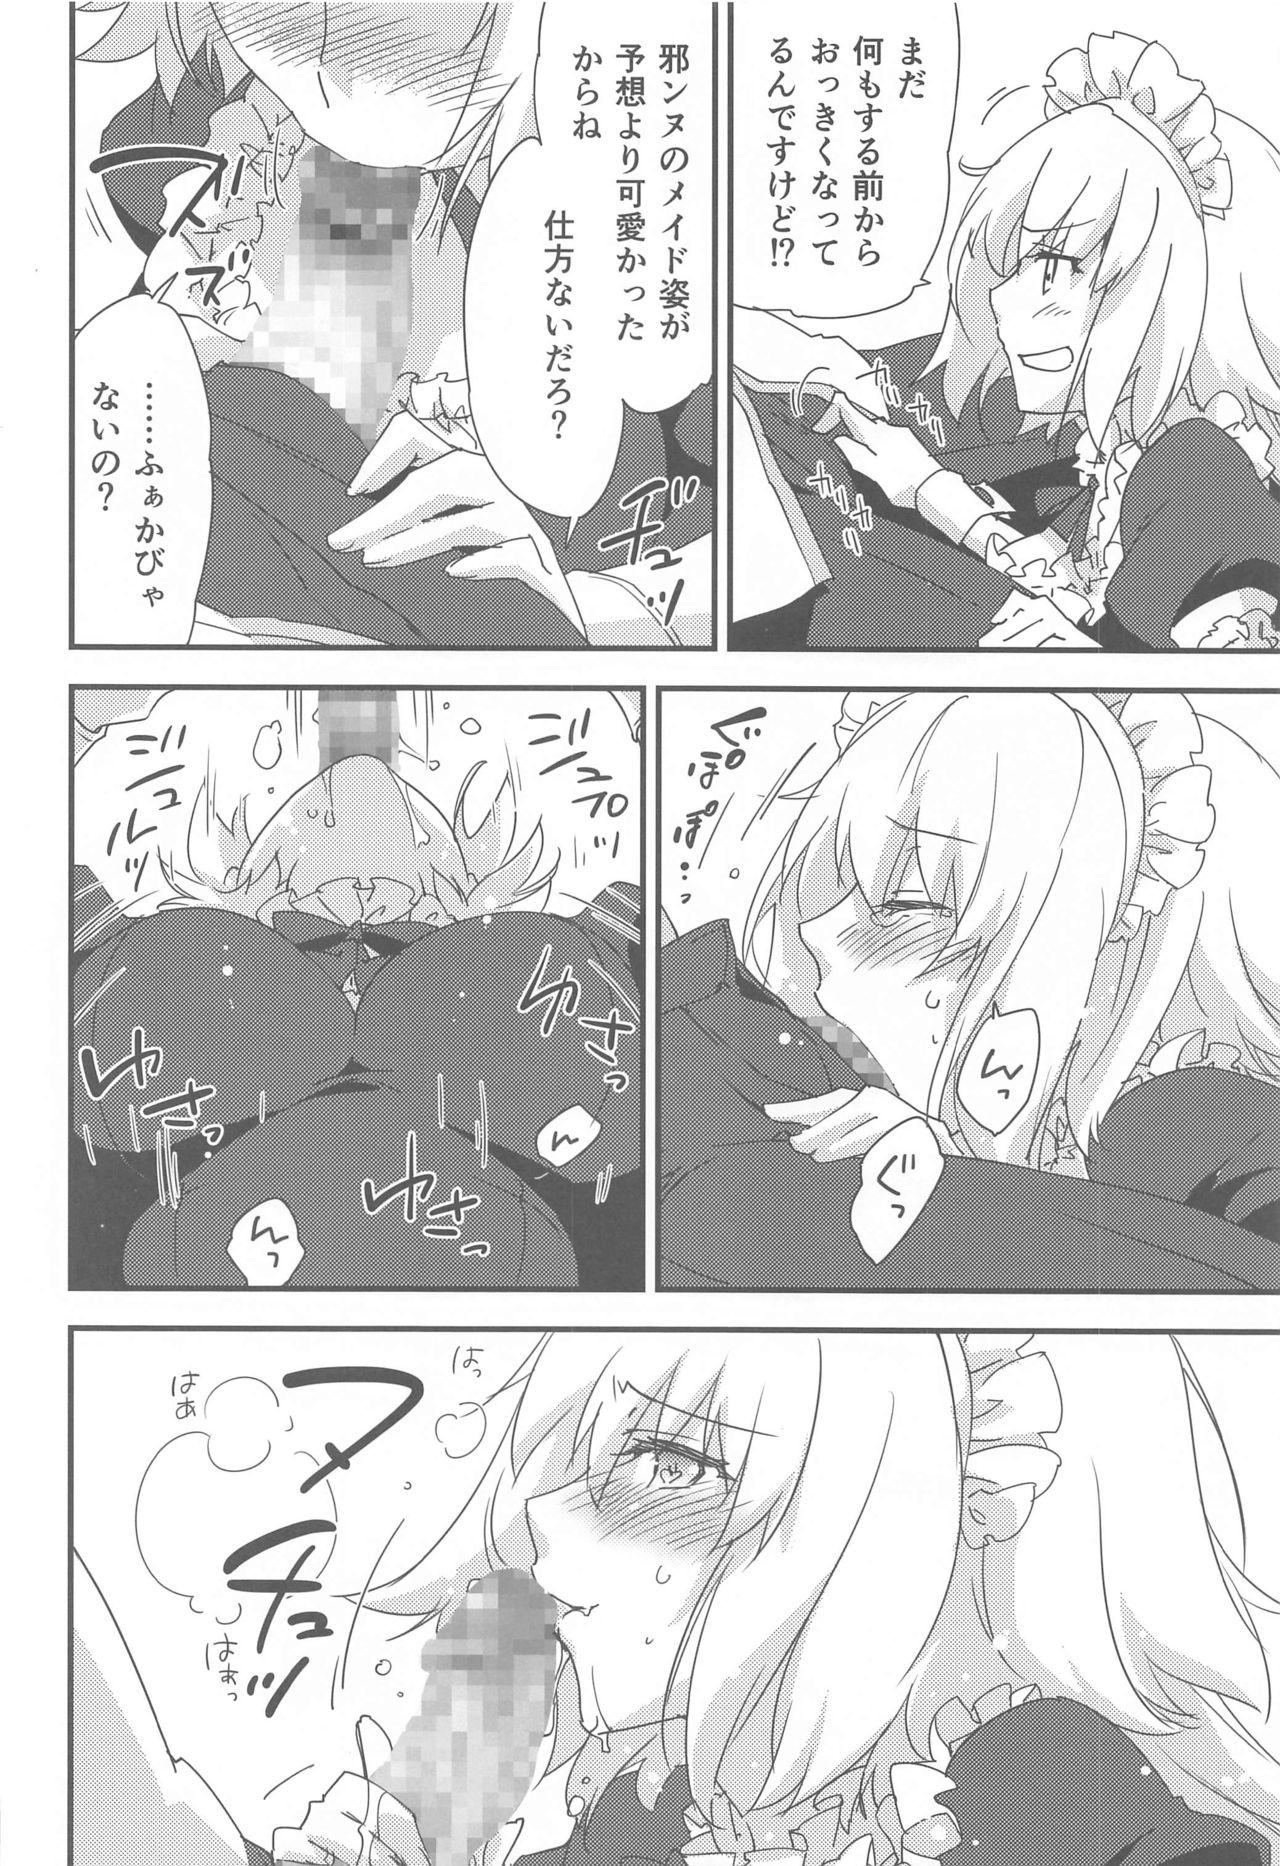 Teenage Gohoushi Maid Jeanne-chan - Fate grand order 18 Year Old - Page 9